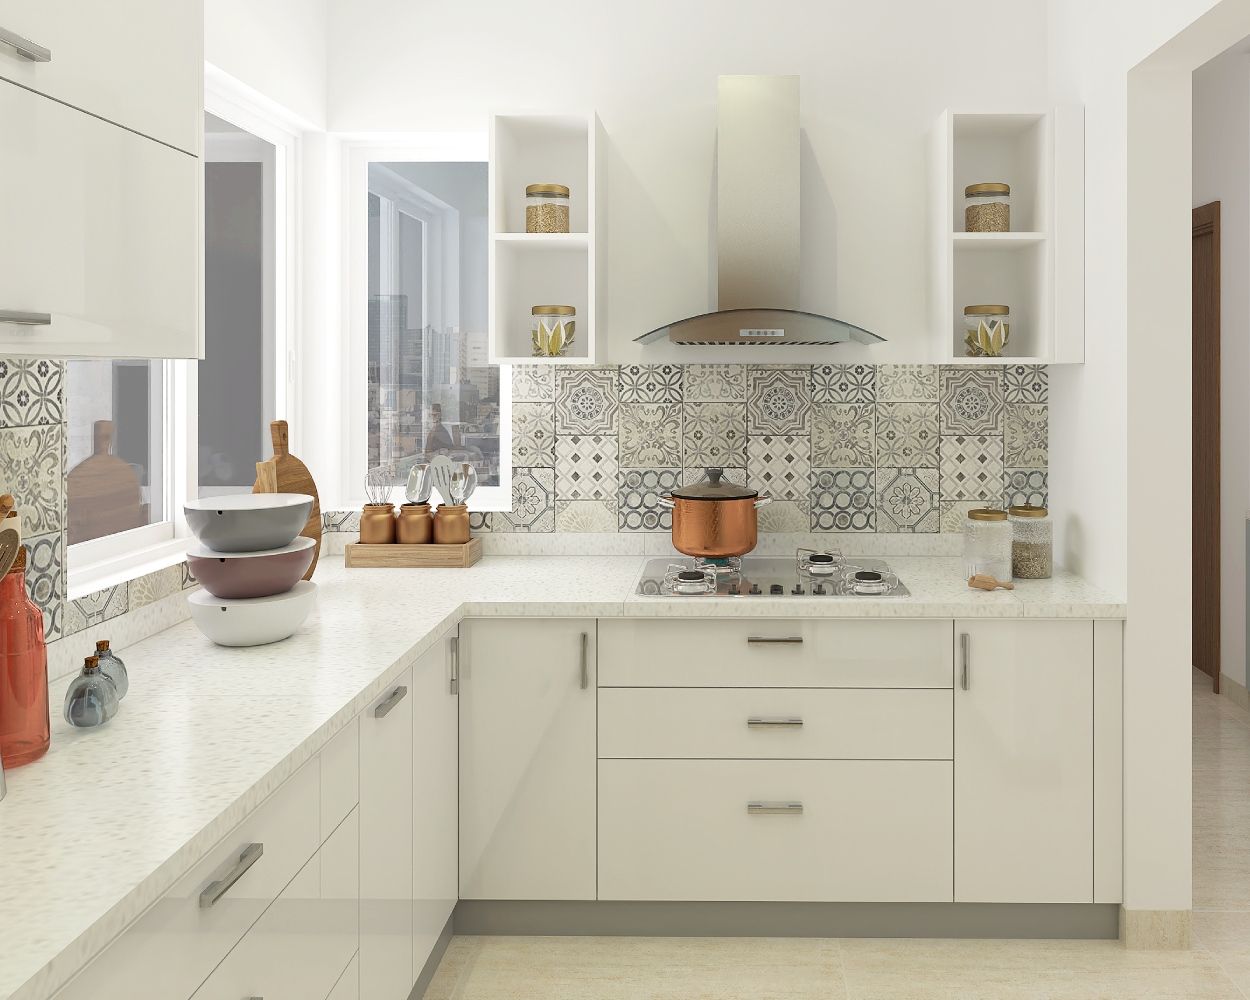 Contemporary L-Shaped Modular Kitchen Design with Frosty White Elegance